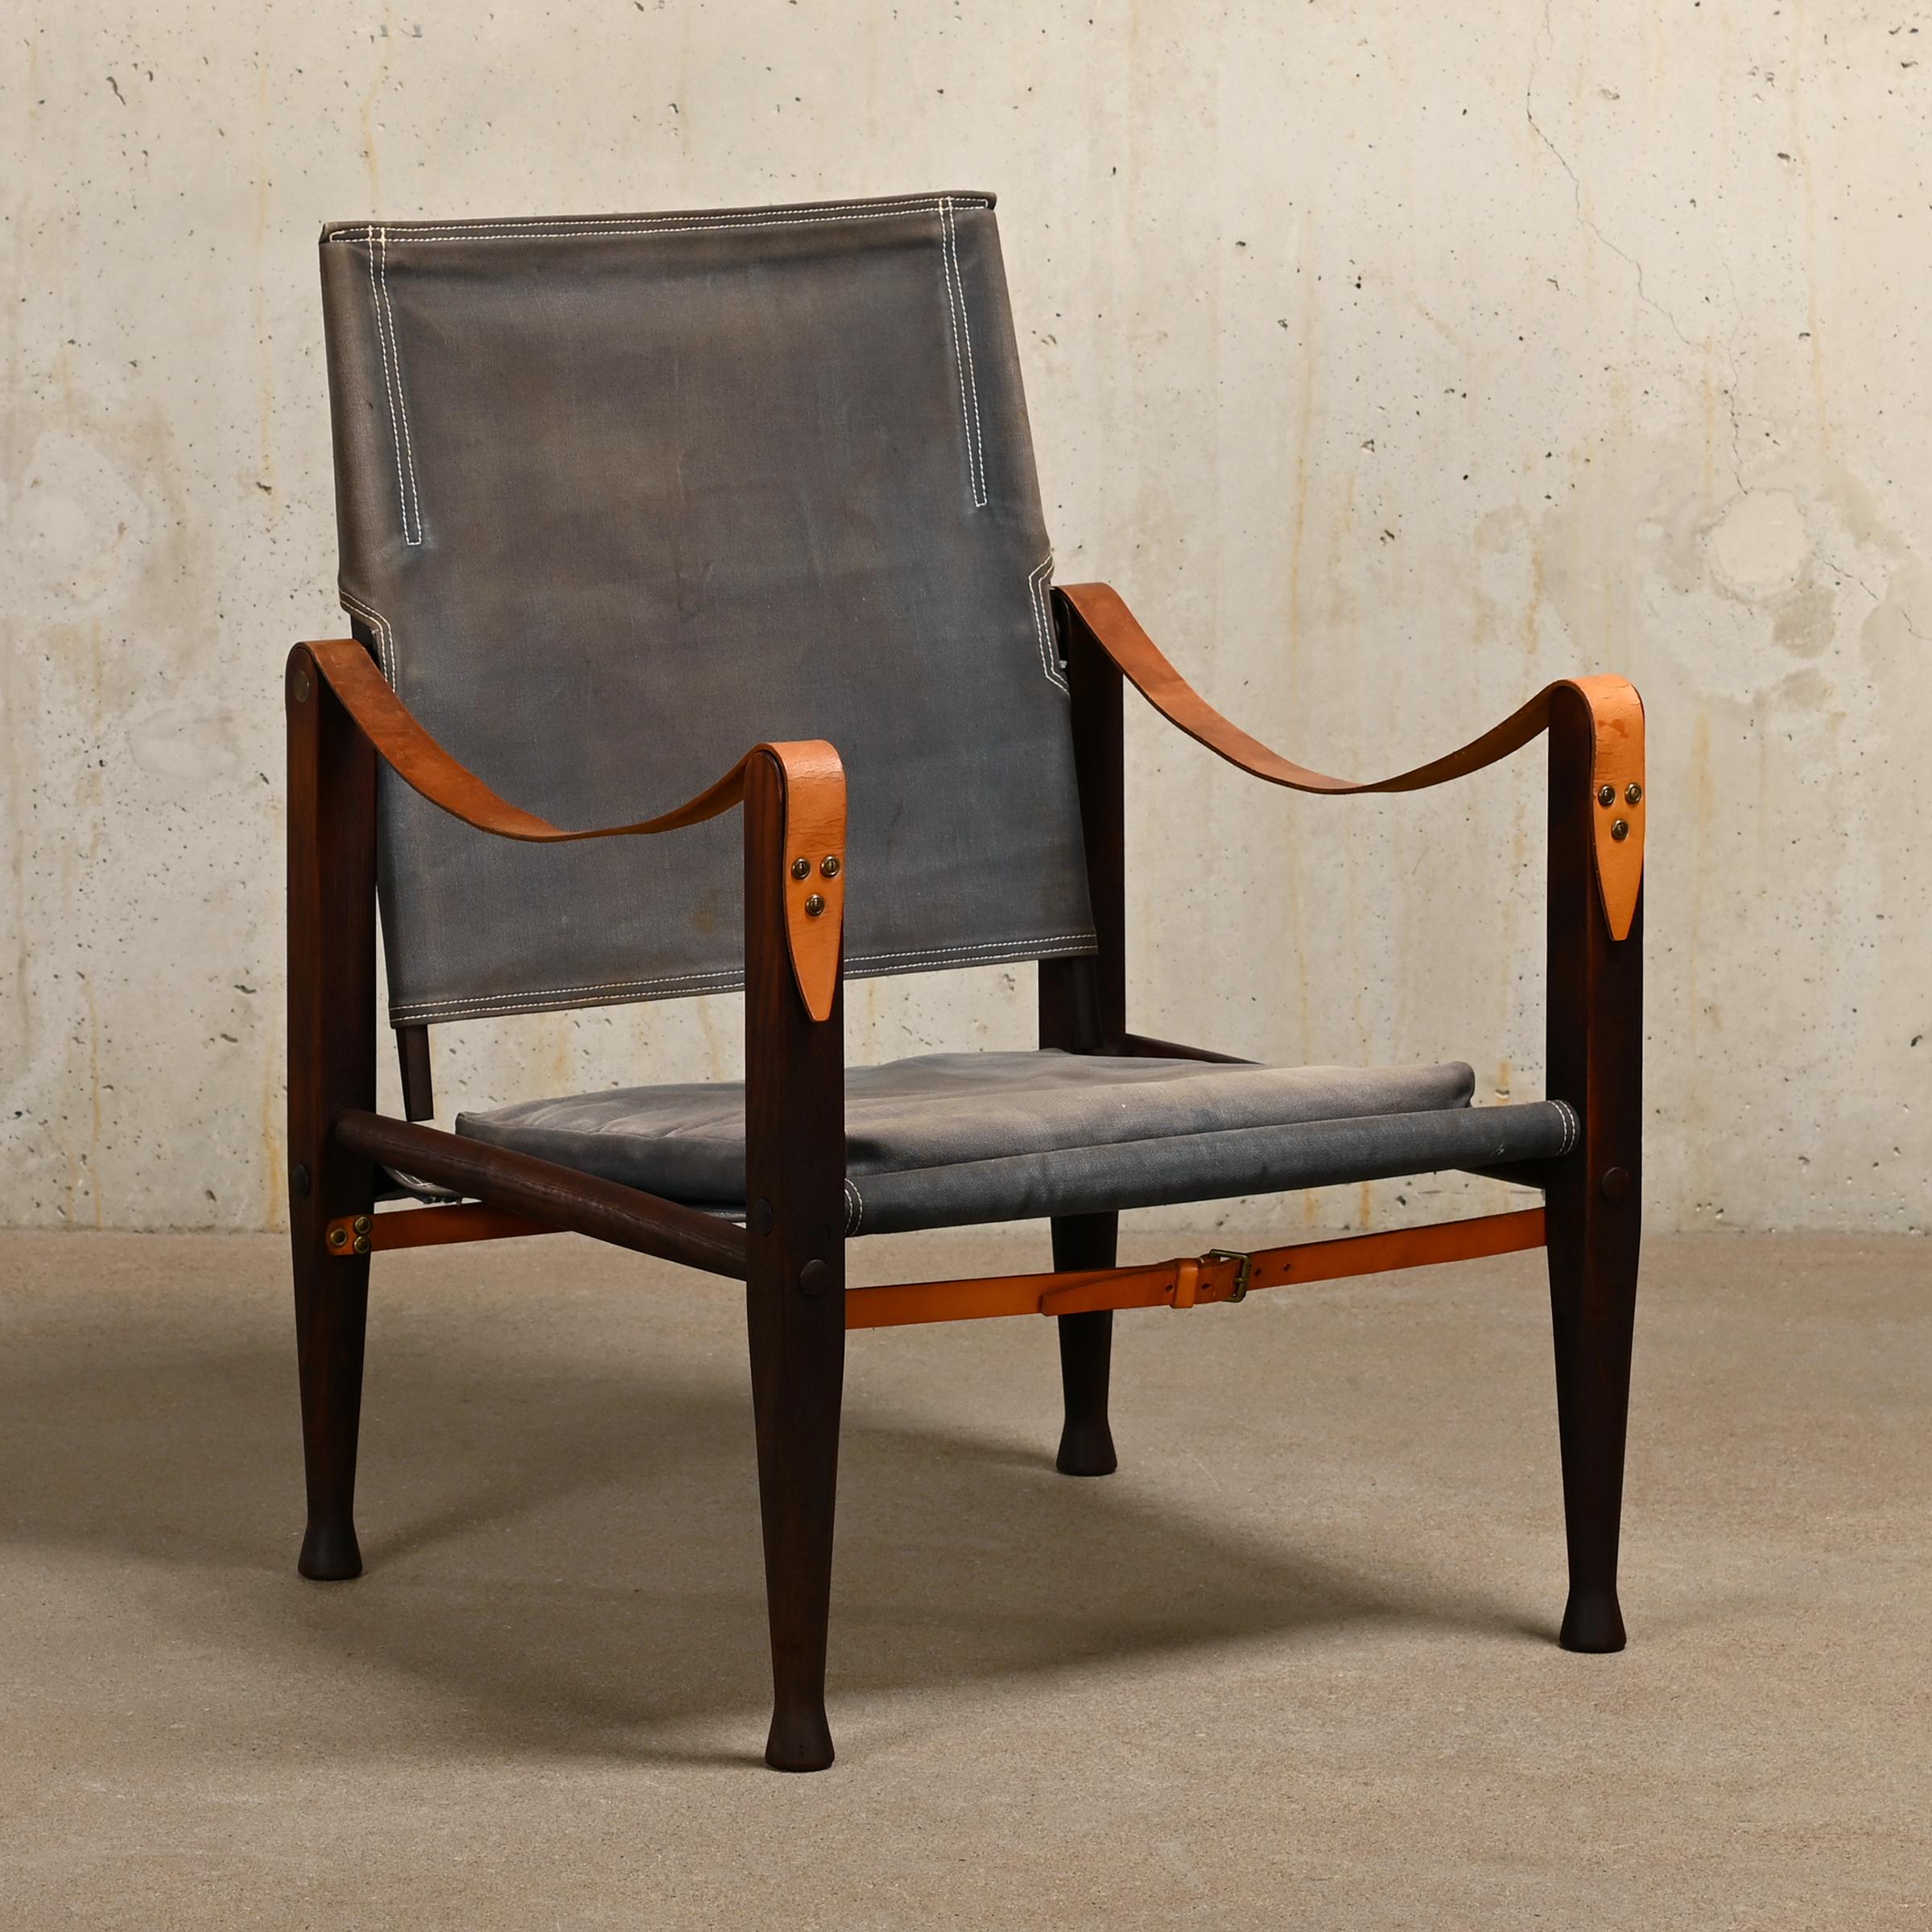 Iconic Safari armchair (model KK 47000) designed by Kaare Klint in 1933 and manufactured by Rud Rasmussen, Denmark. Dark brown stained Ash wooden frame upholstered with grey / blue canvas seat, back and losse cushion. Armrests and straps with full